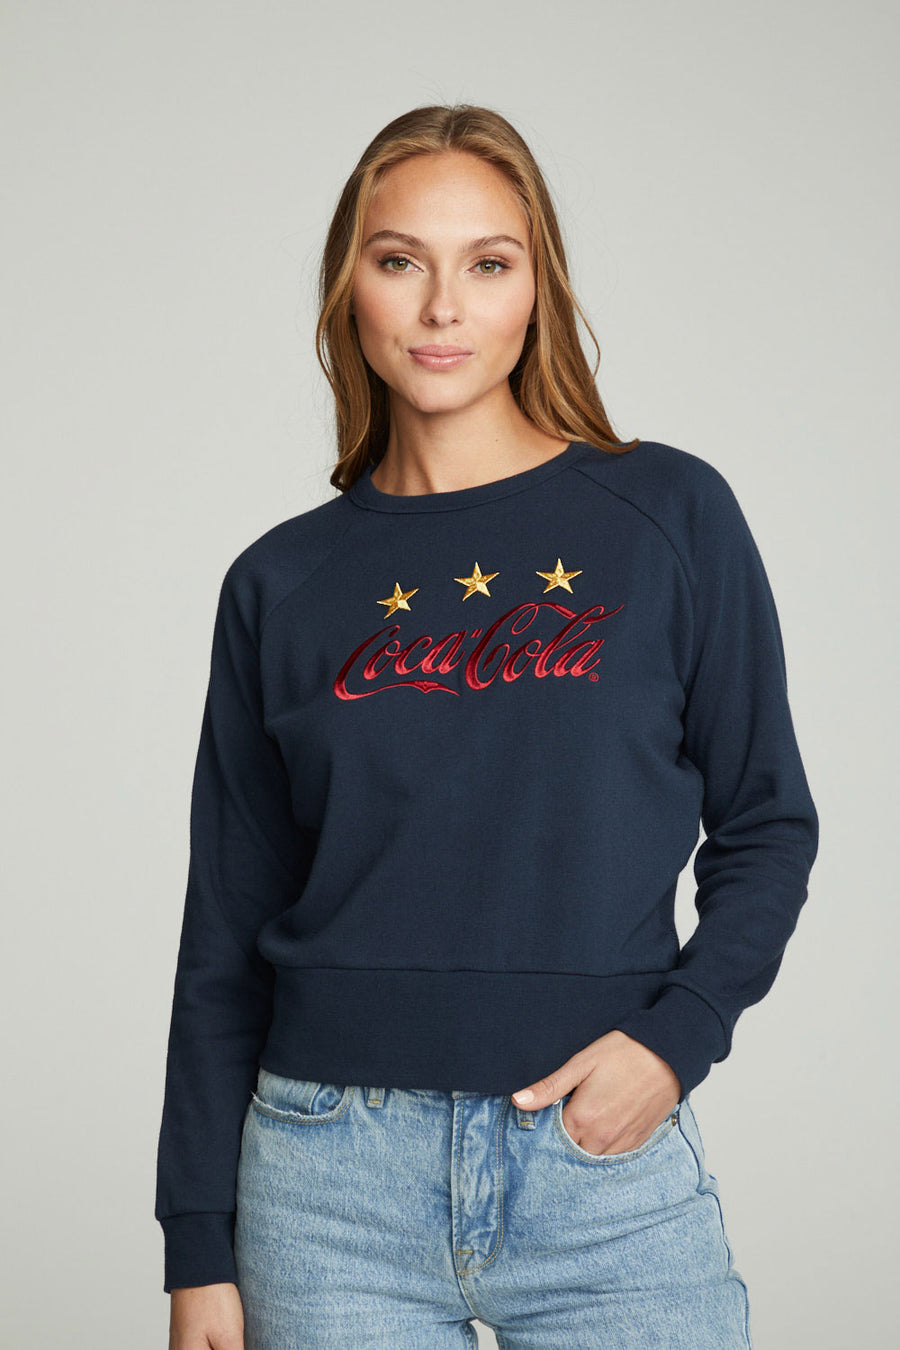 Coca Cola - Embroidered Logo WOMENS chaserbrand